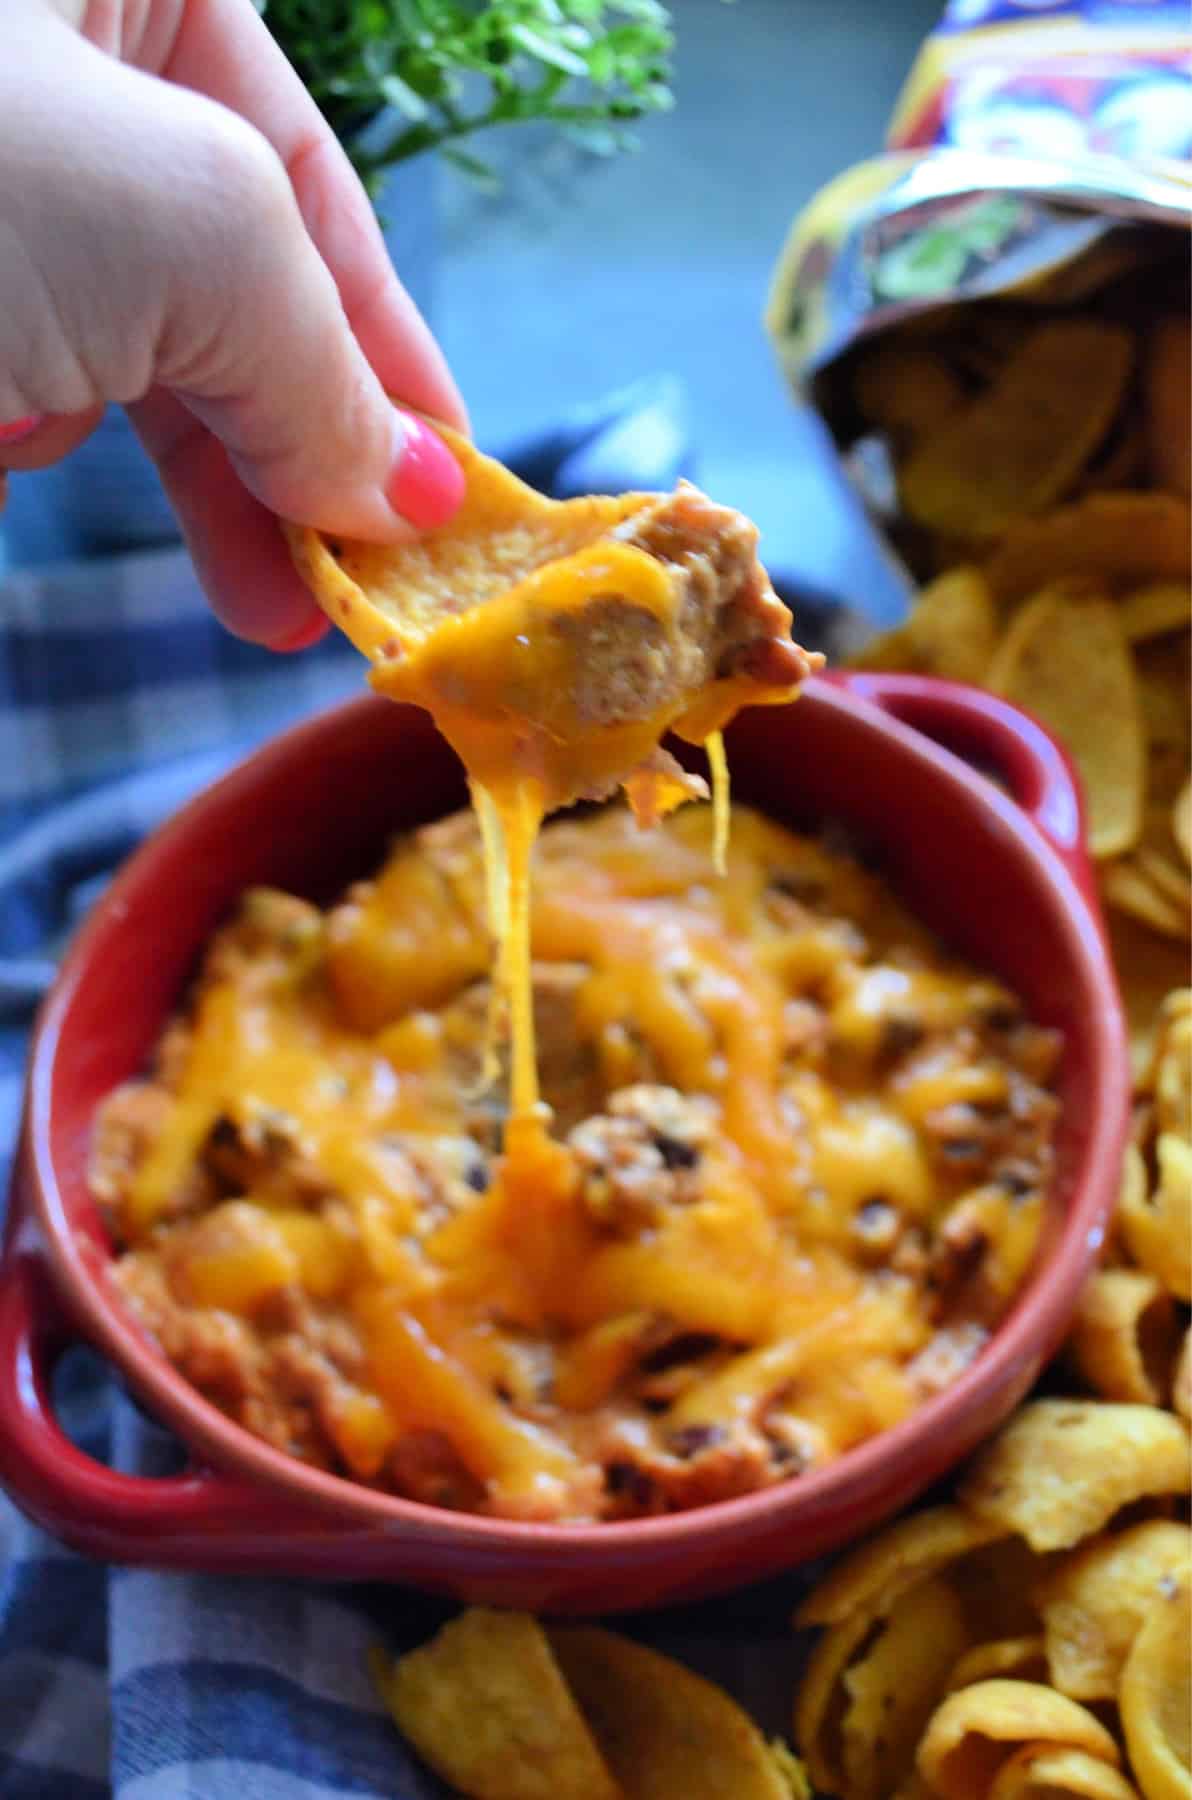 Hand scooping Slow Cooker Chili Cheese Dip with a Frito.